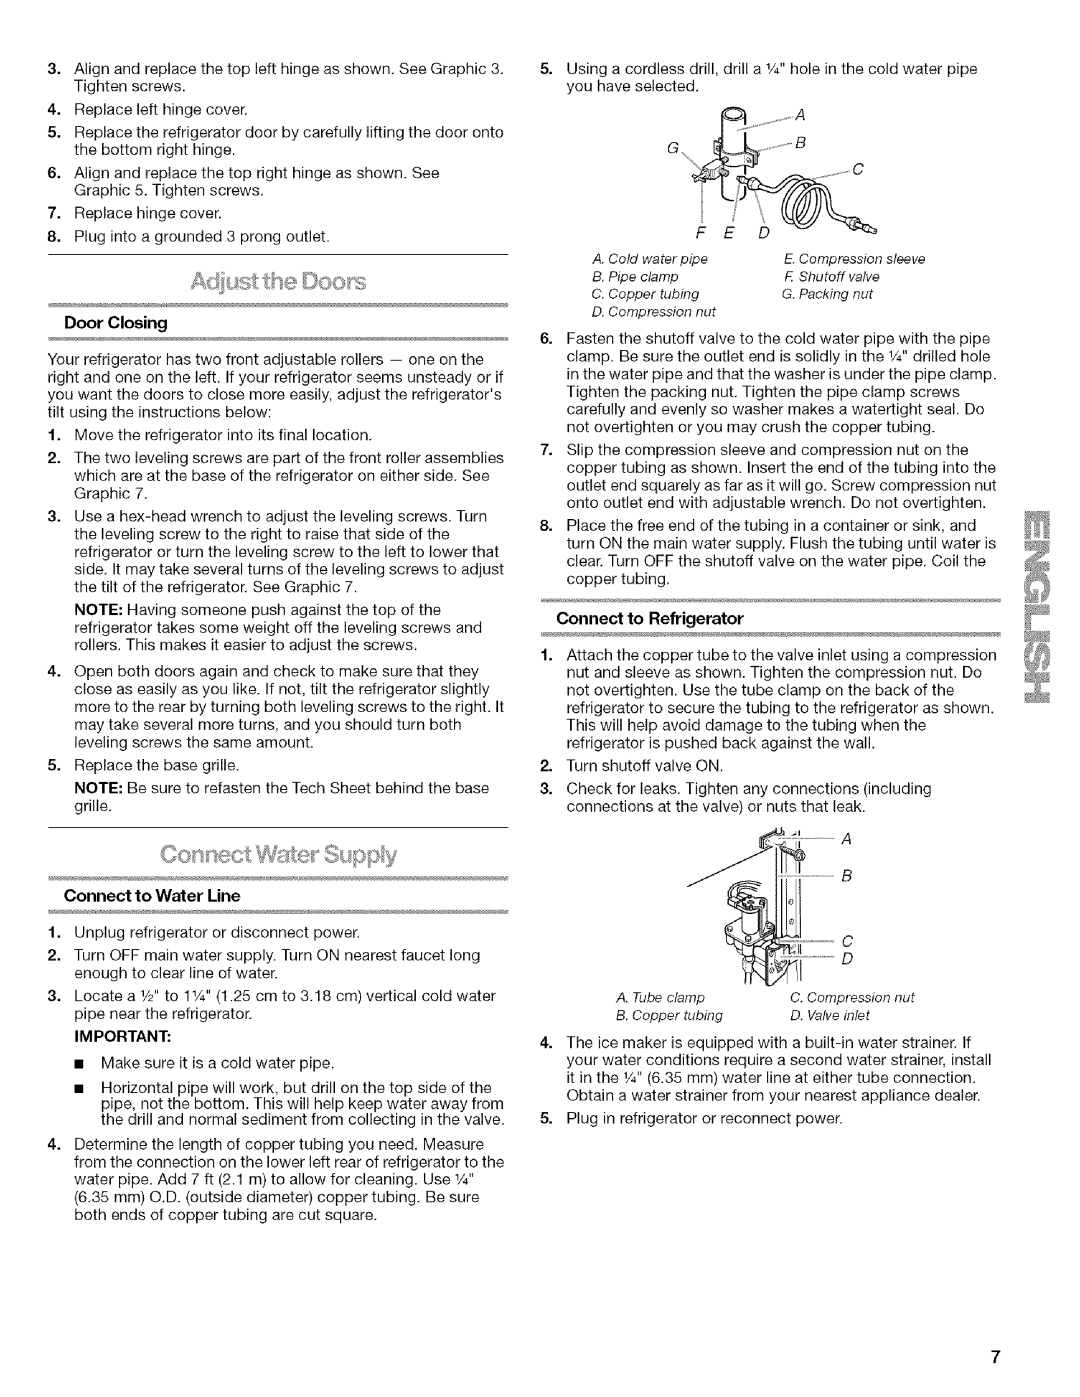 Kenmore w10144349A manual Adiust :he corn, Connect to Water Line, Door Closing, Connect to Refrigerator 